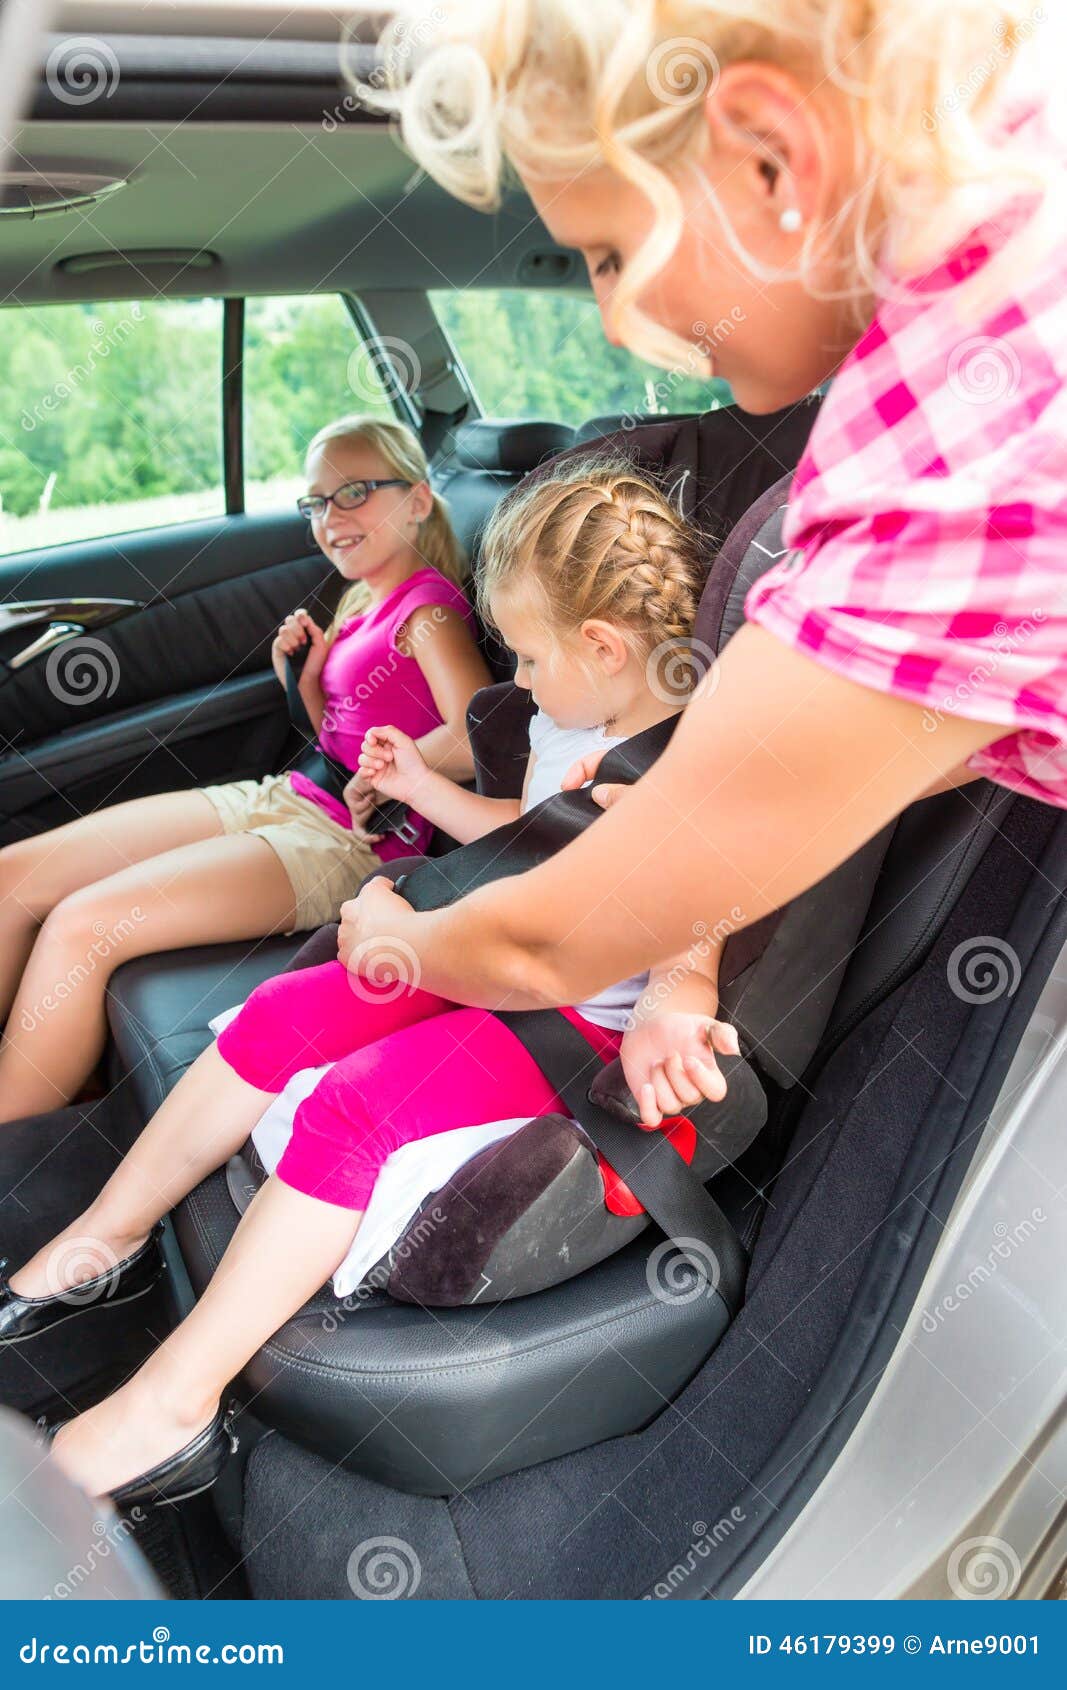 mother buckling up on child in car